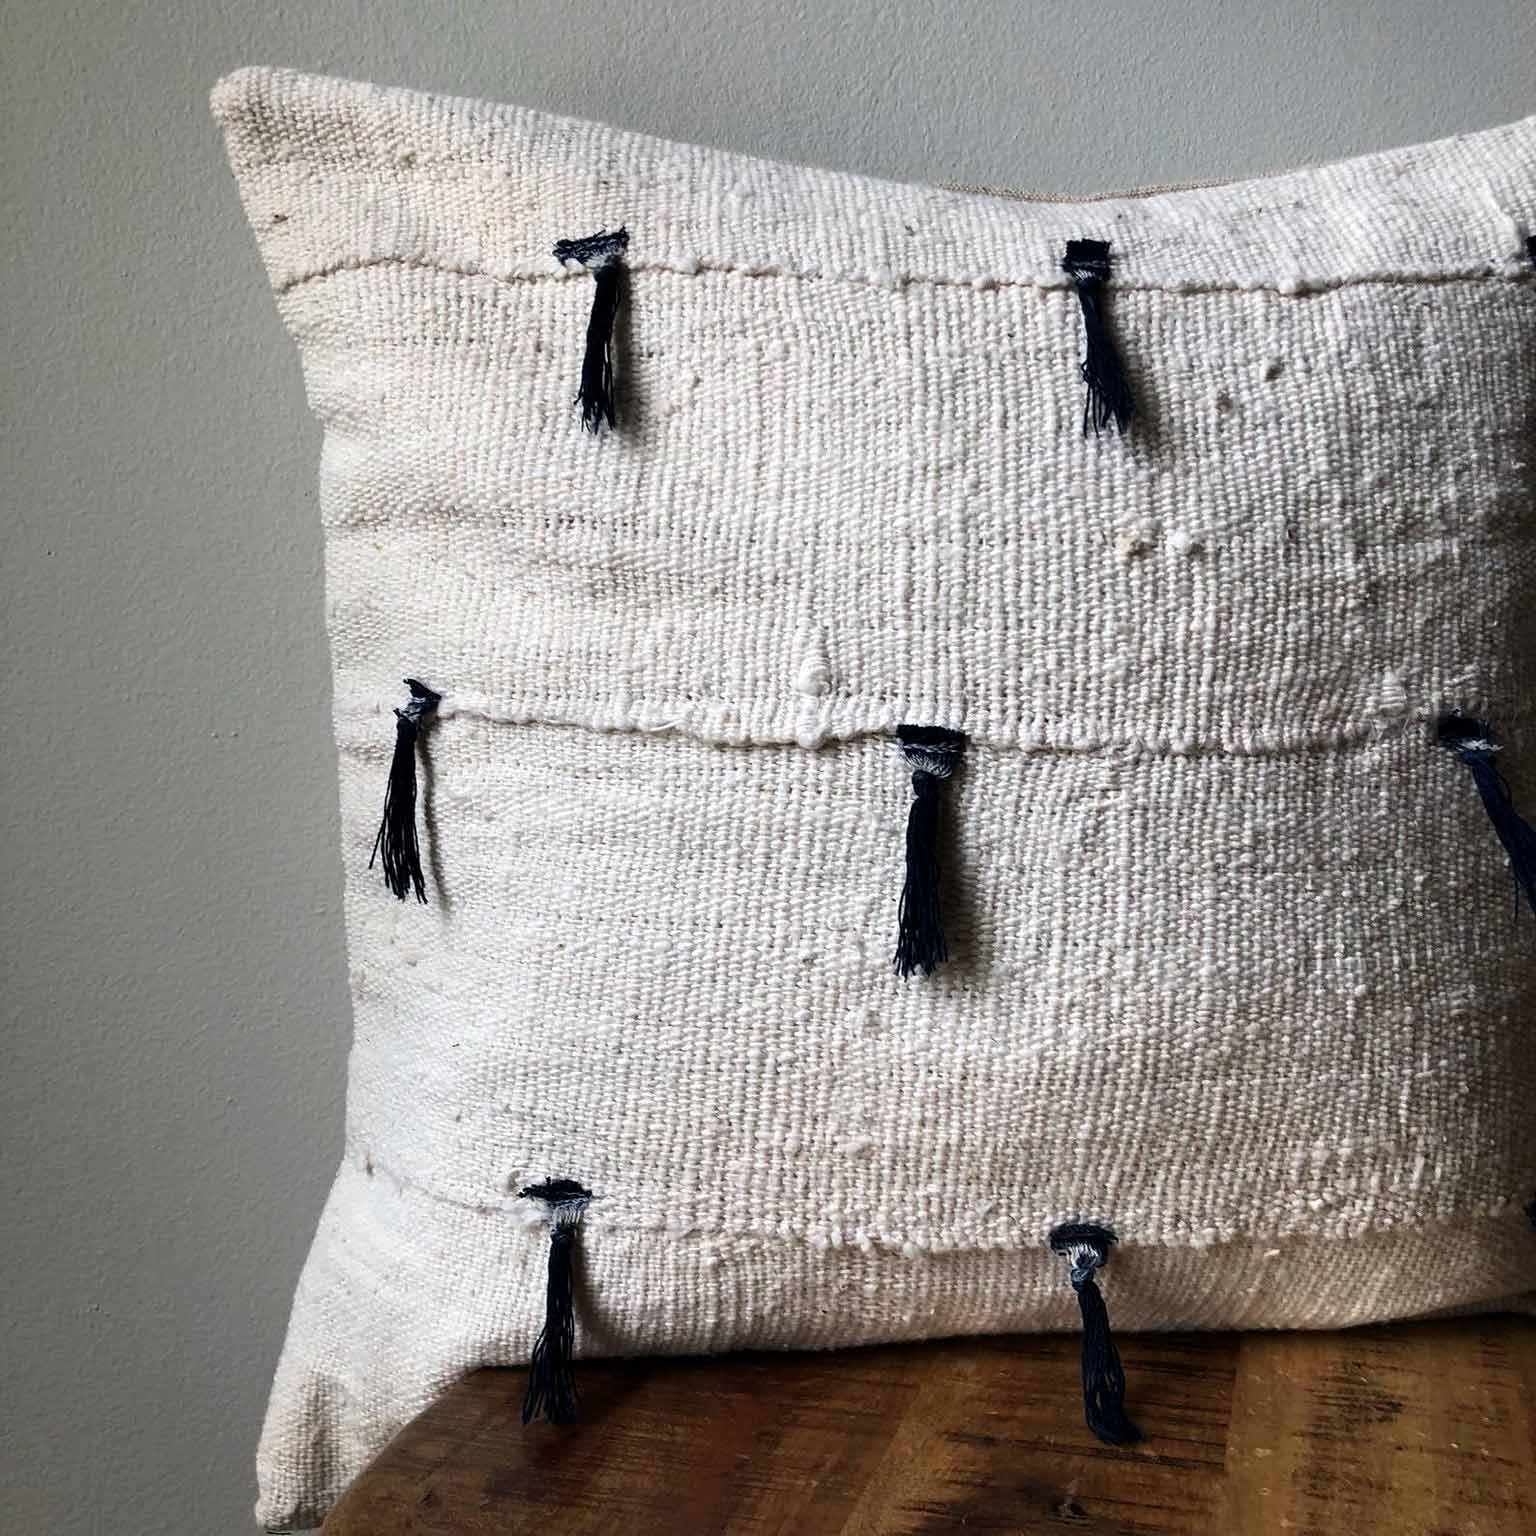 Mudcloth pillow with blue tassels